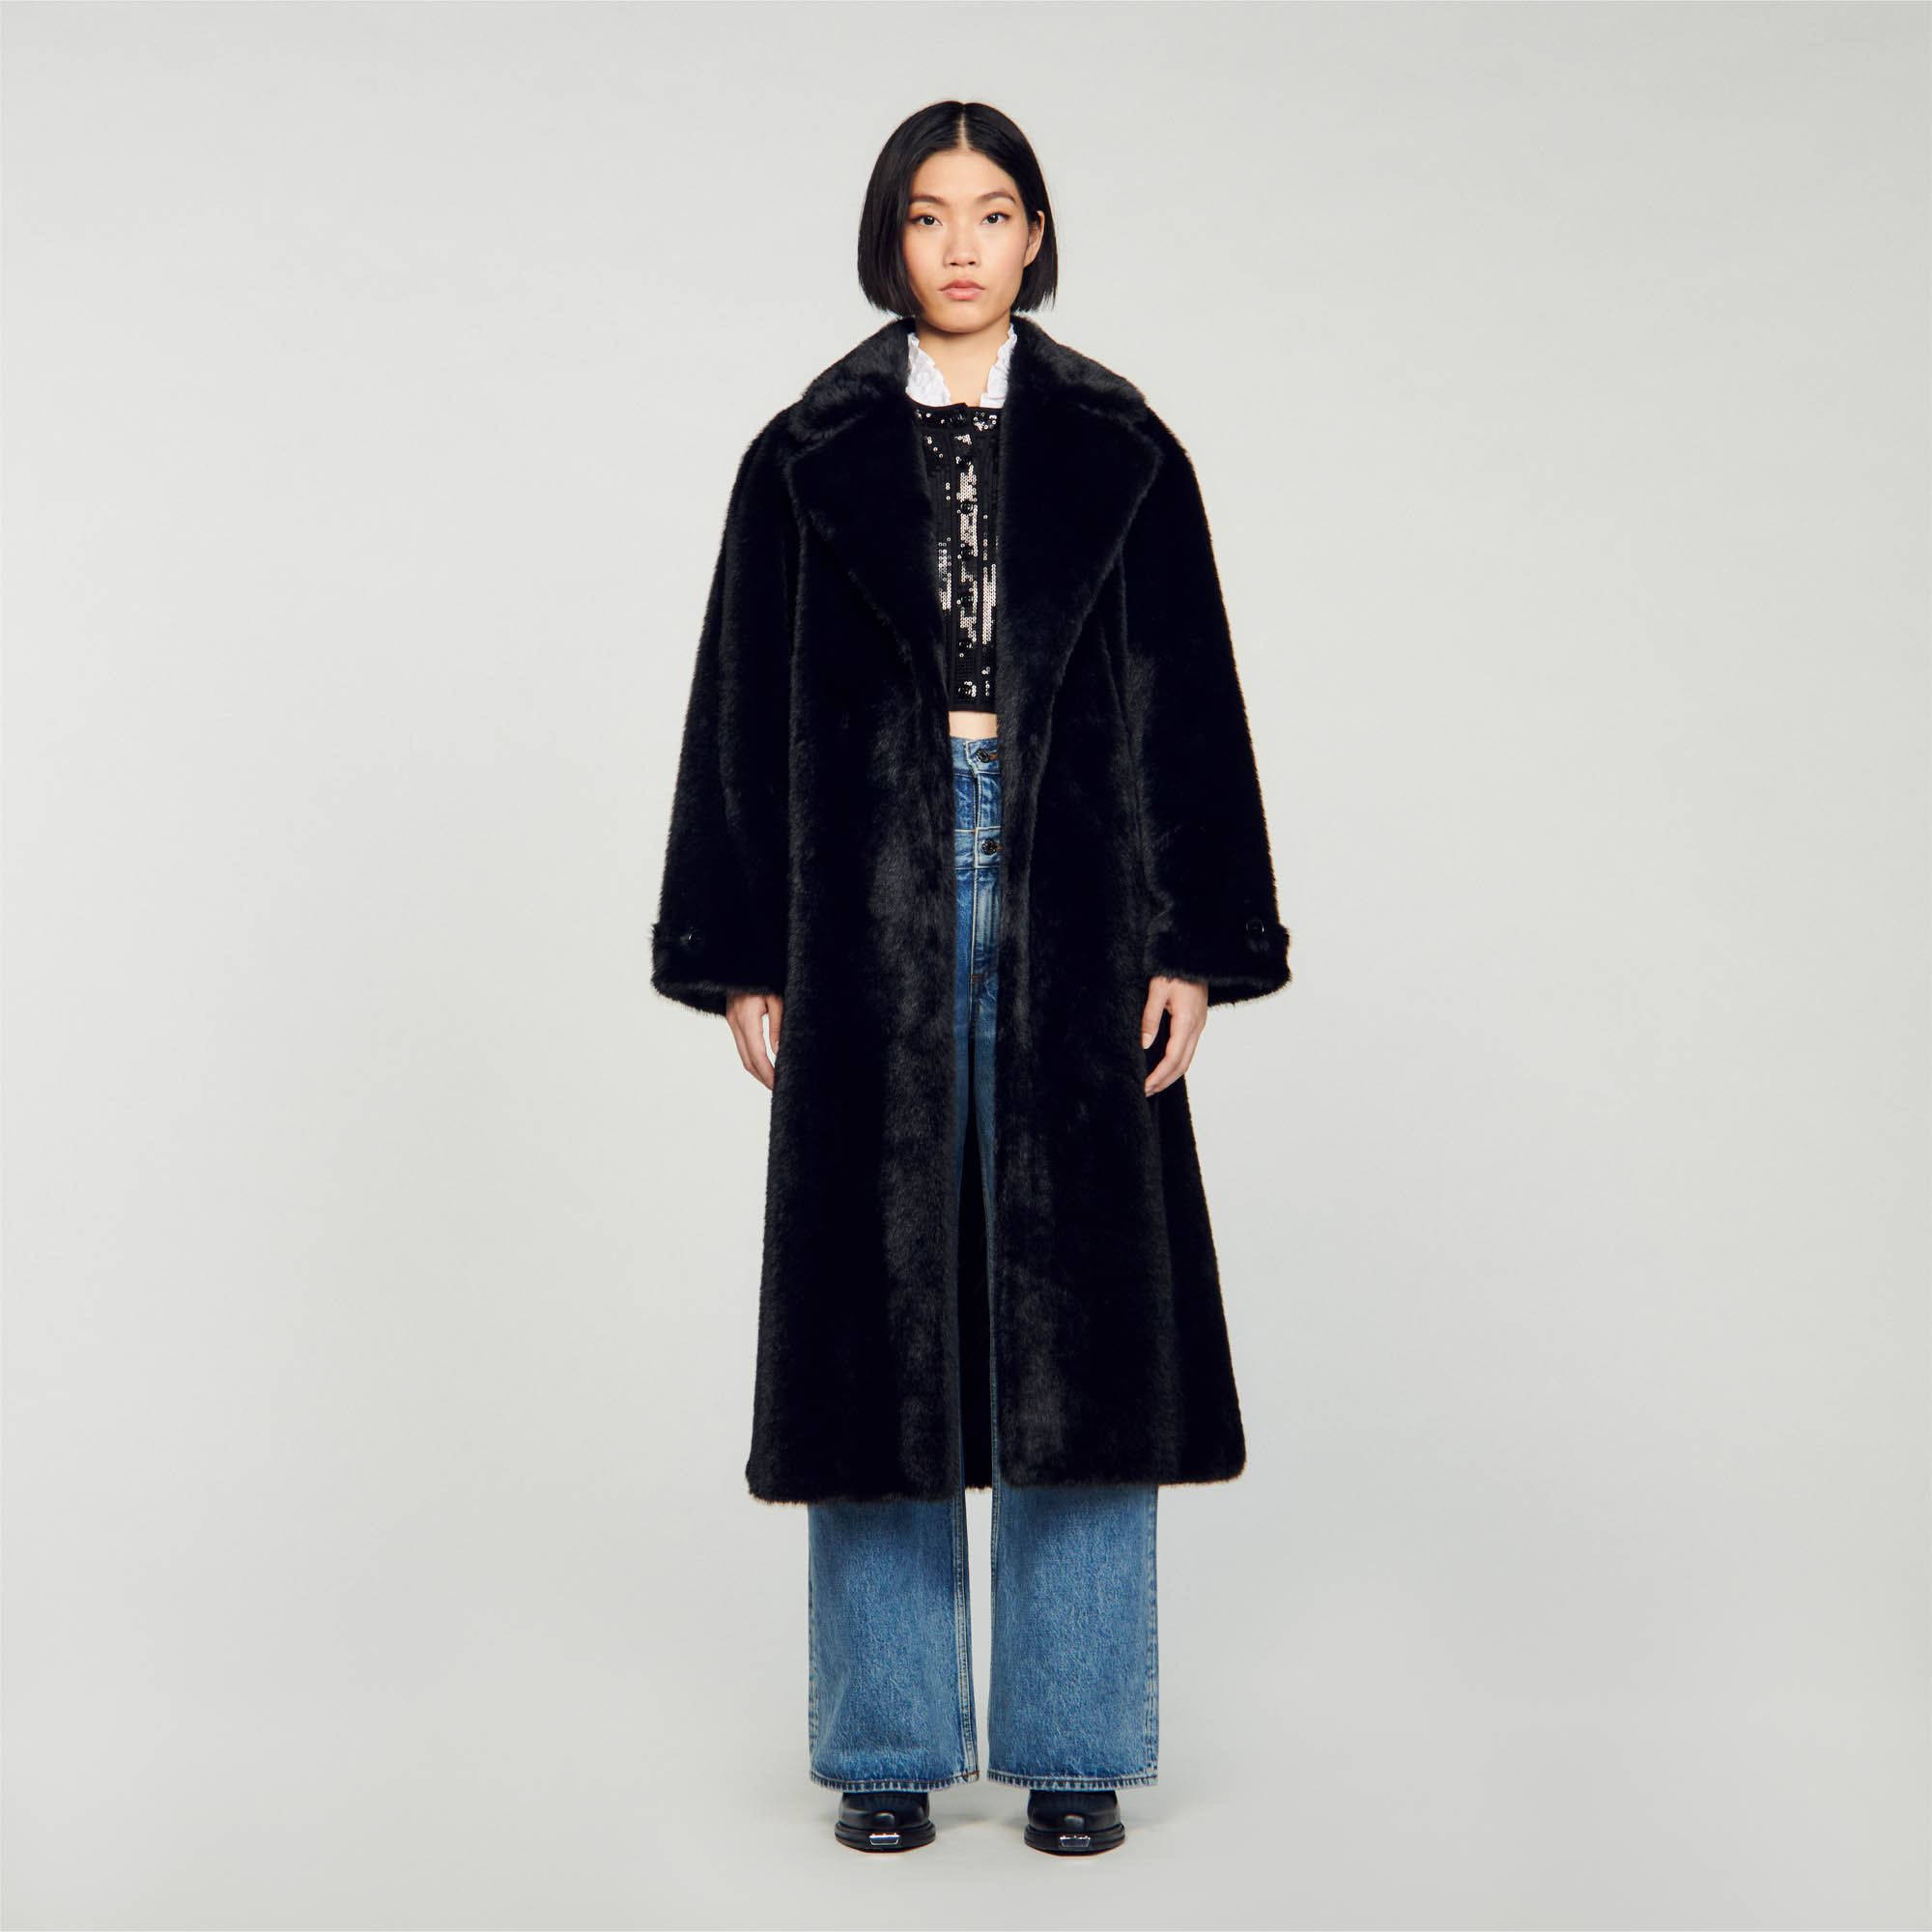 Sandro polyester Long faux fur coat, with an XL collar, long sleeves, a tie belt on the waist and two side pockets